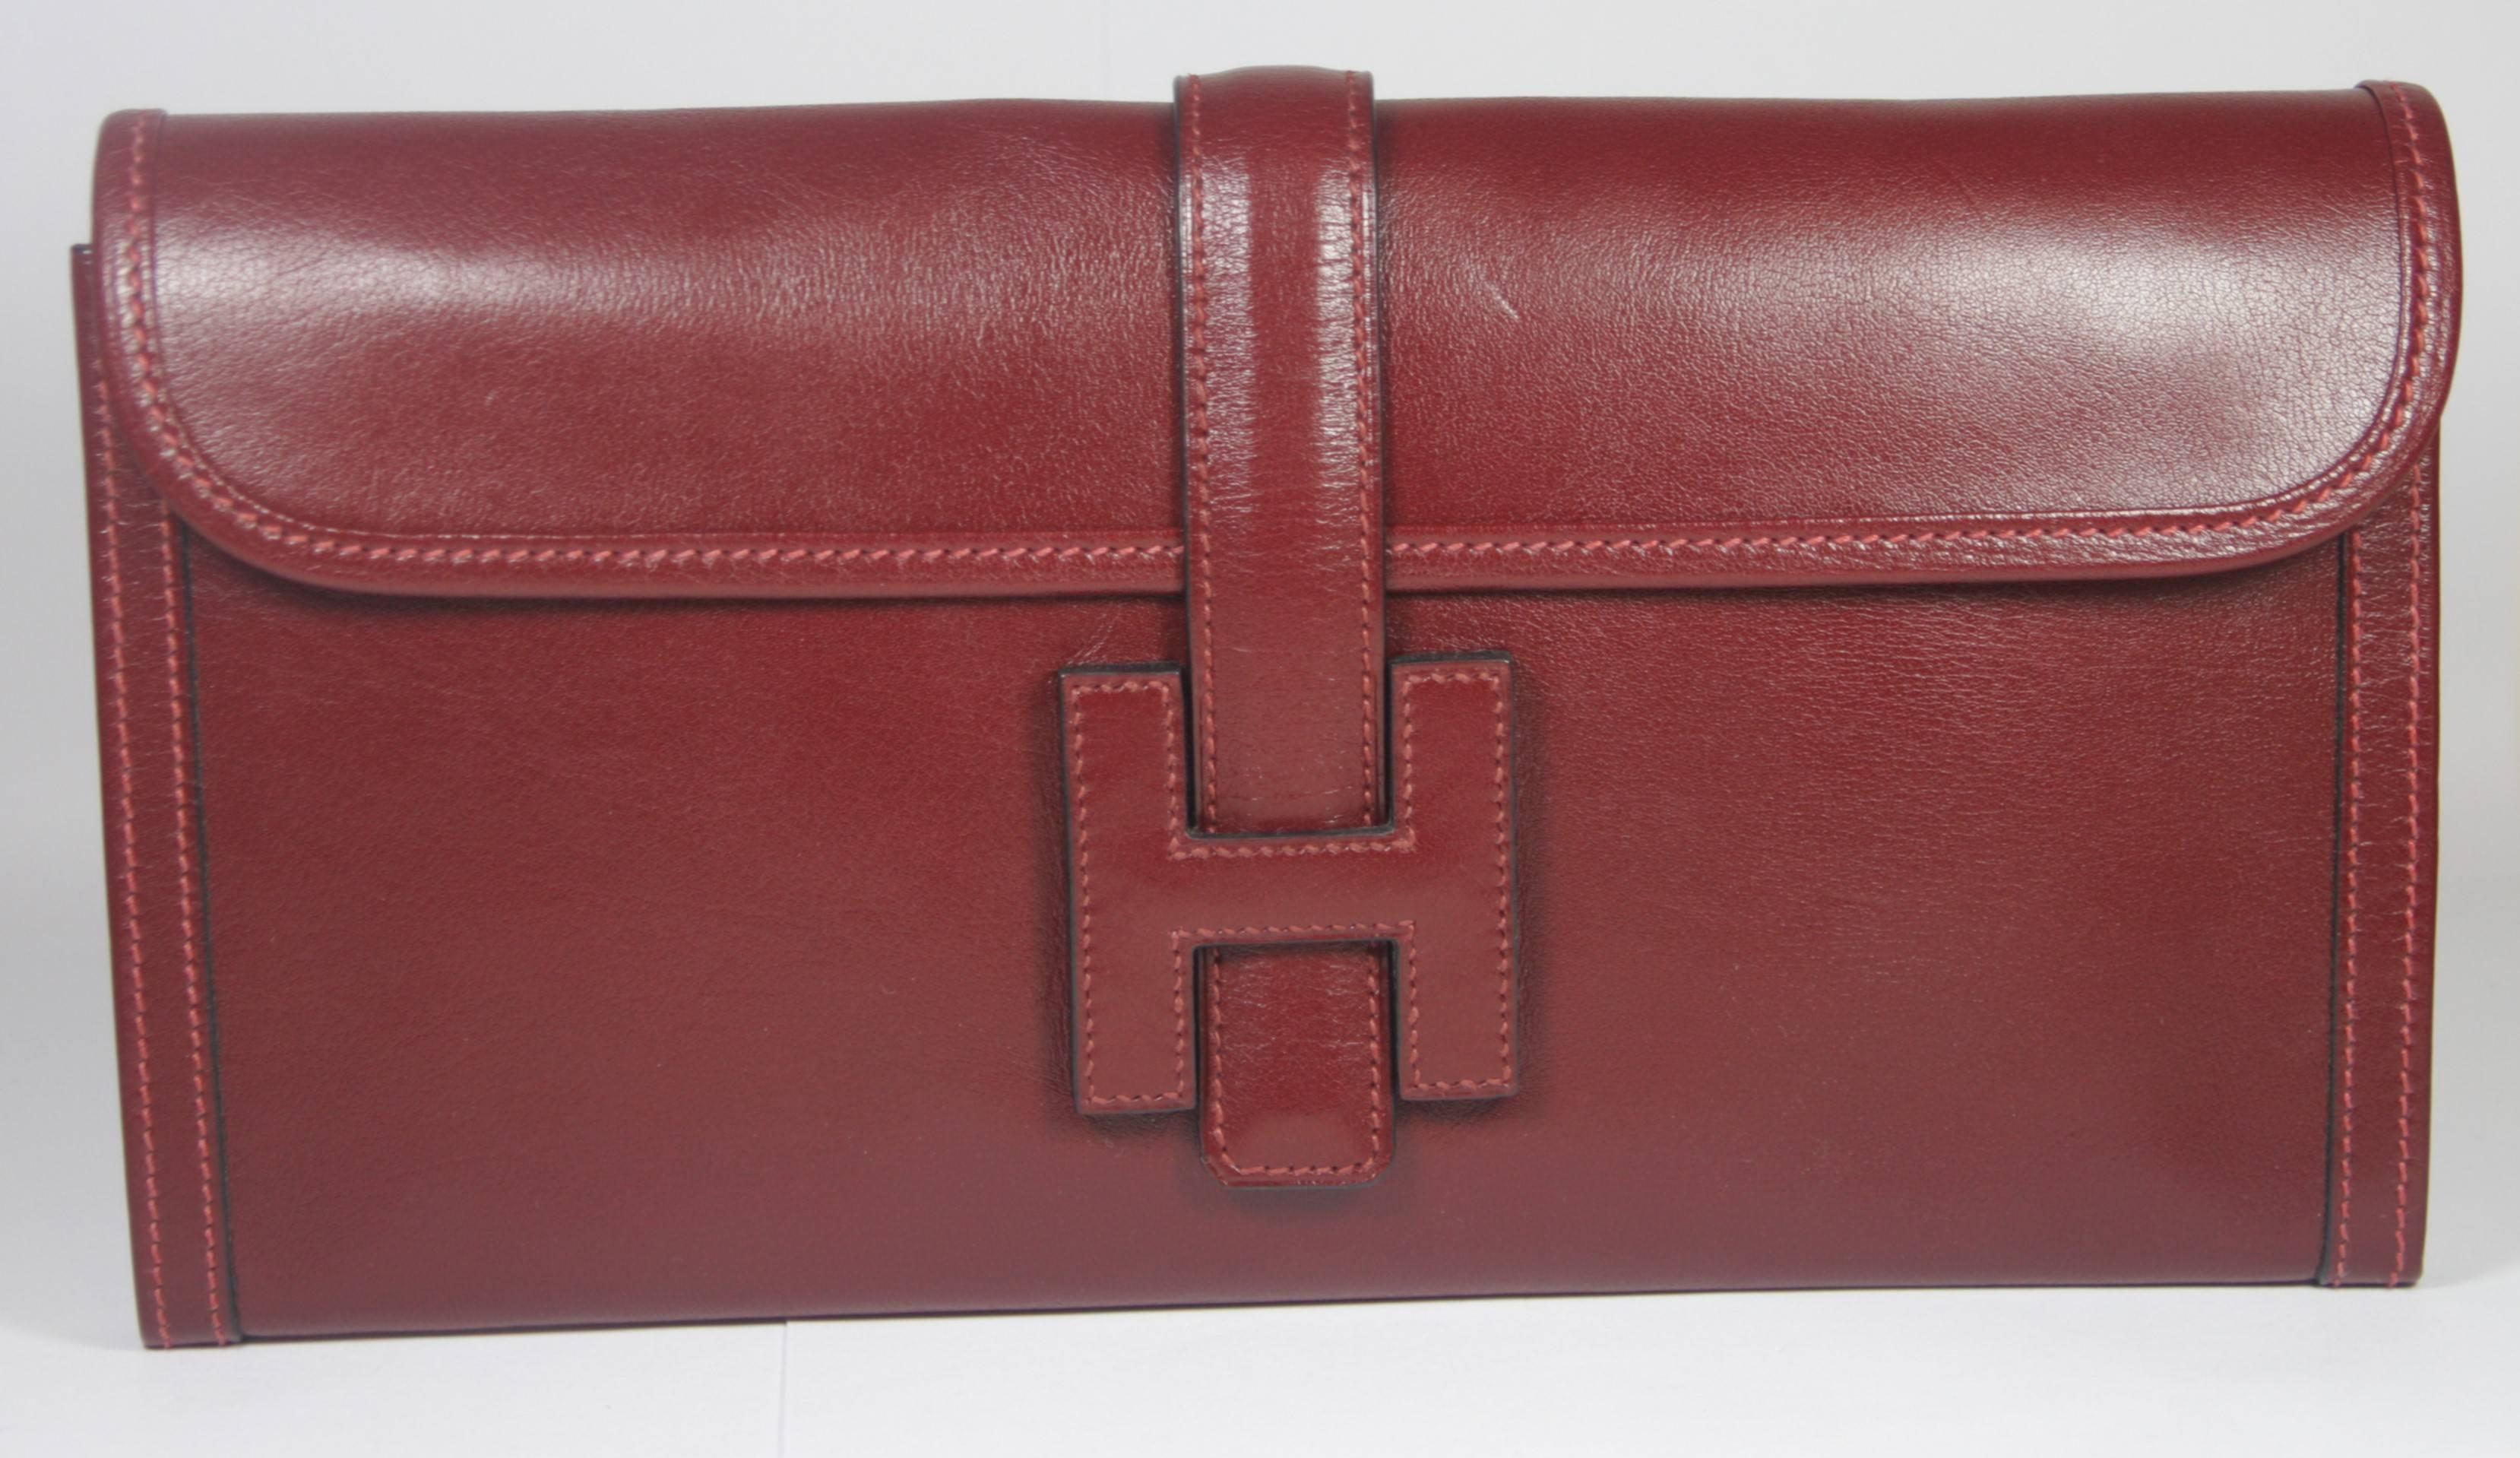 This Hermes design is available for viewing at our Beverly Hills Boutique. We offer a large selection of evening gowns and luxury garments. 

 This clutch is composed of a beautiful burgundy leather with top stitch detailing. In excellent vintage